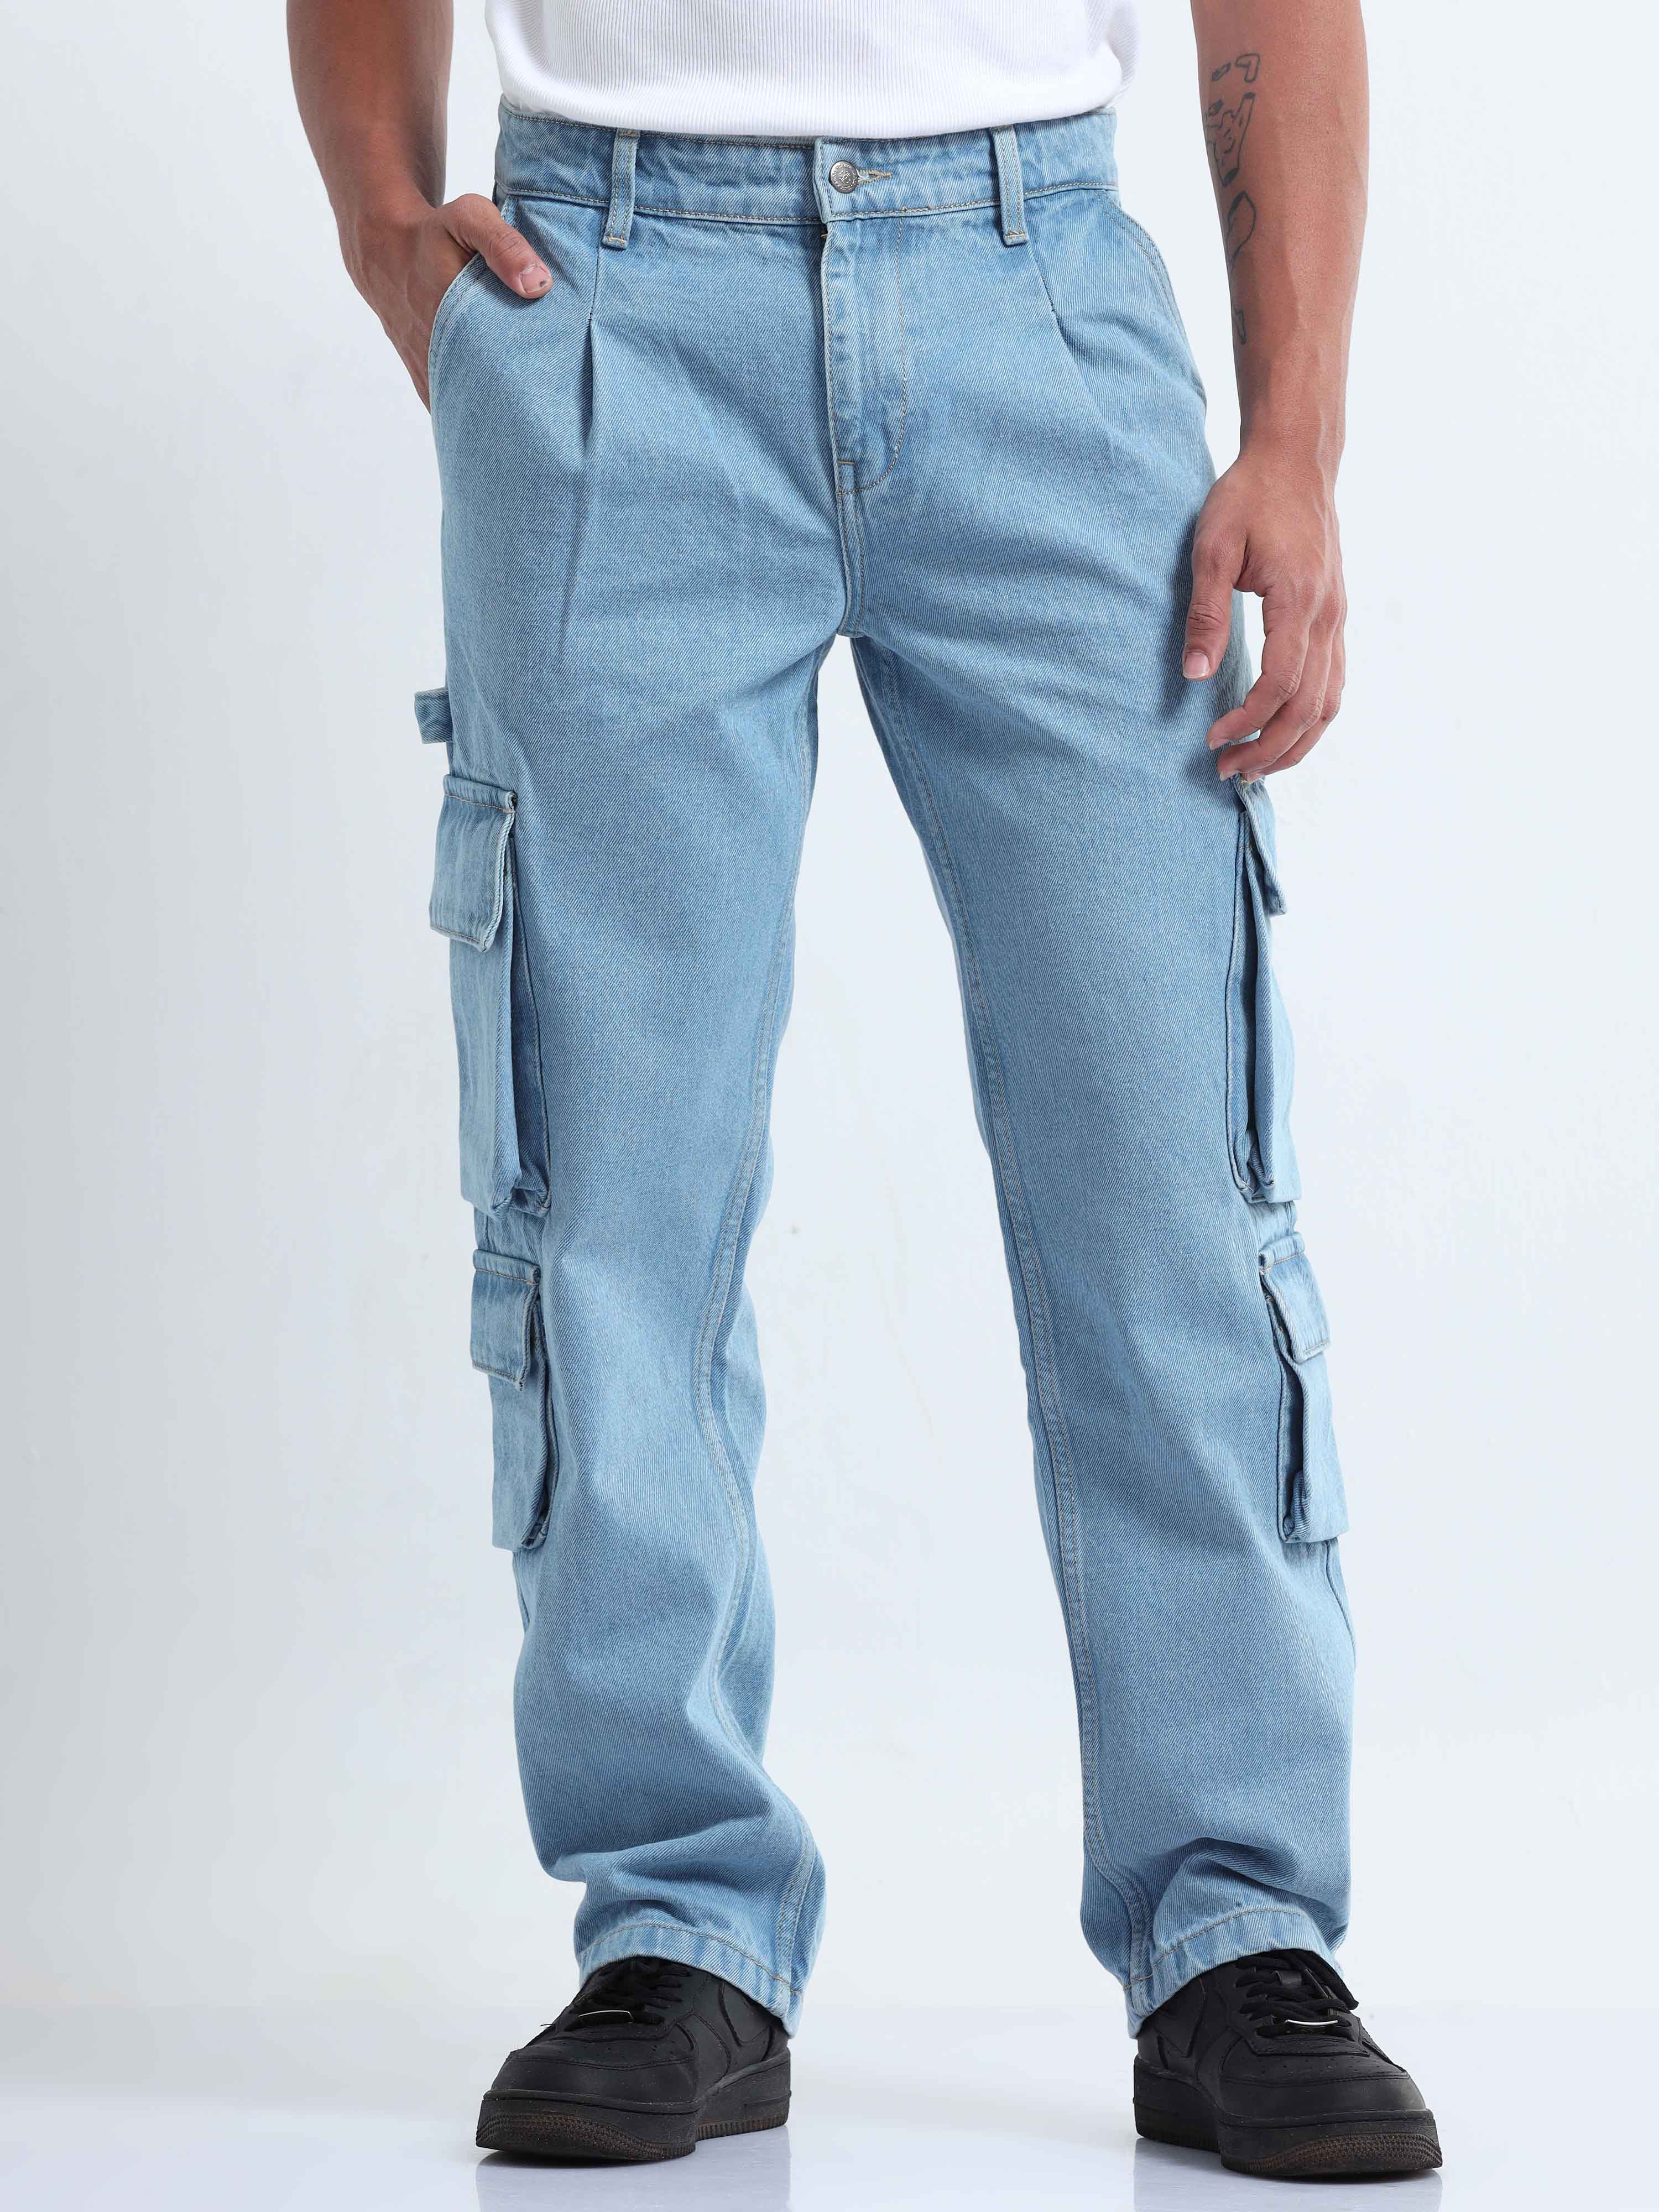 Ragzo Blue Cargo Jeans Pant For Men Slim Fit Stretchable